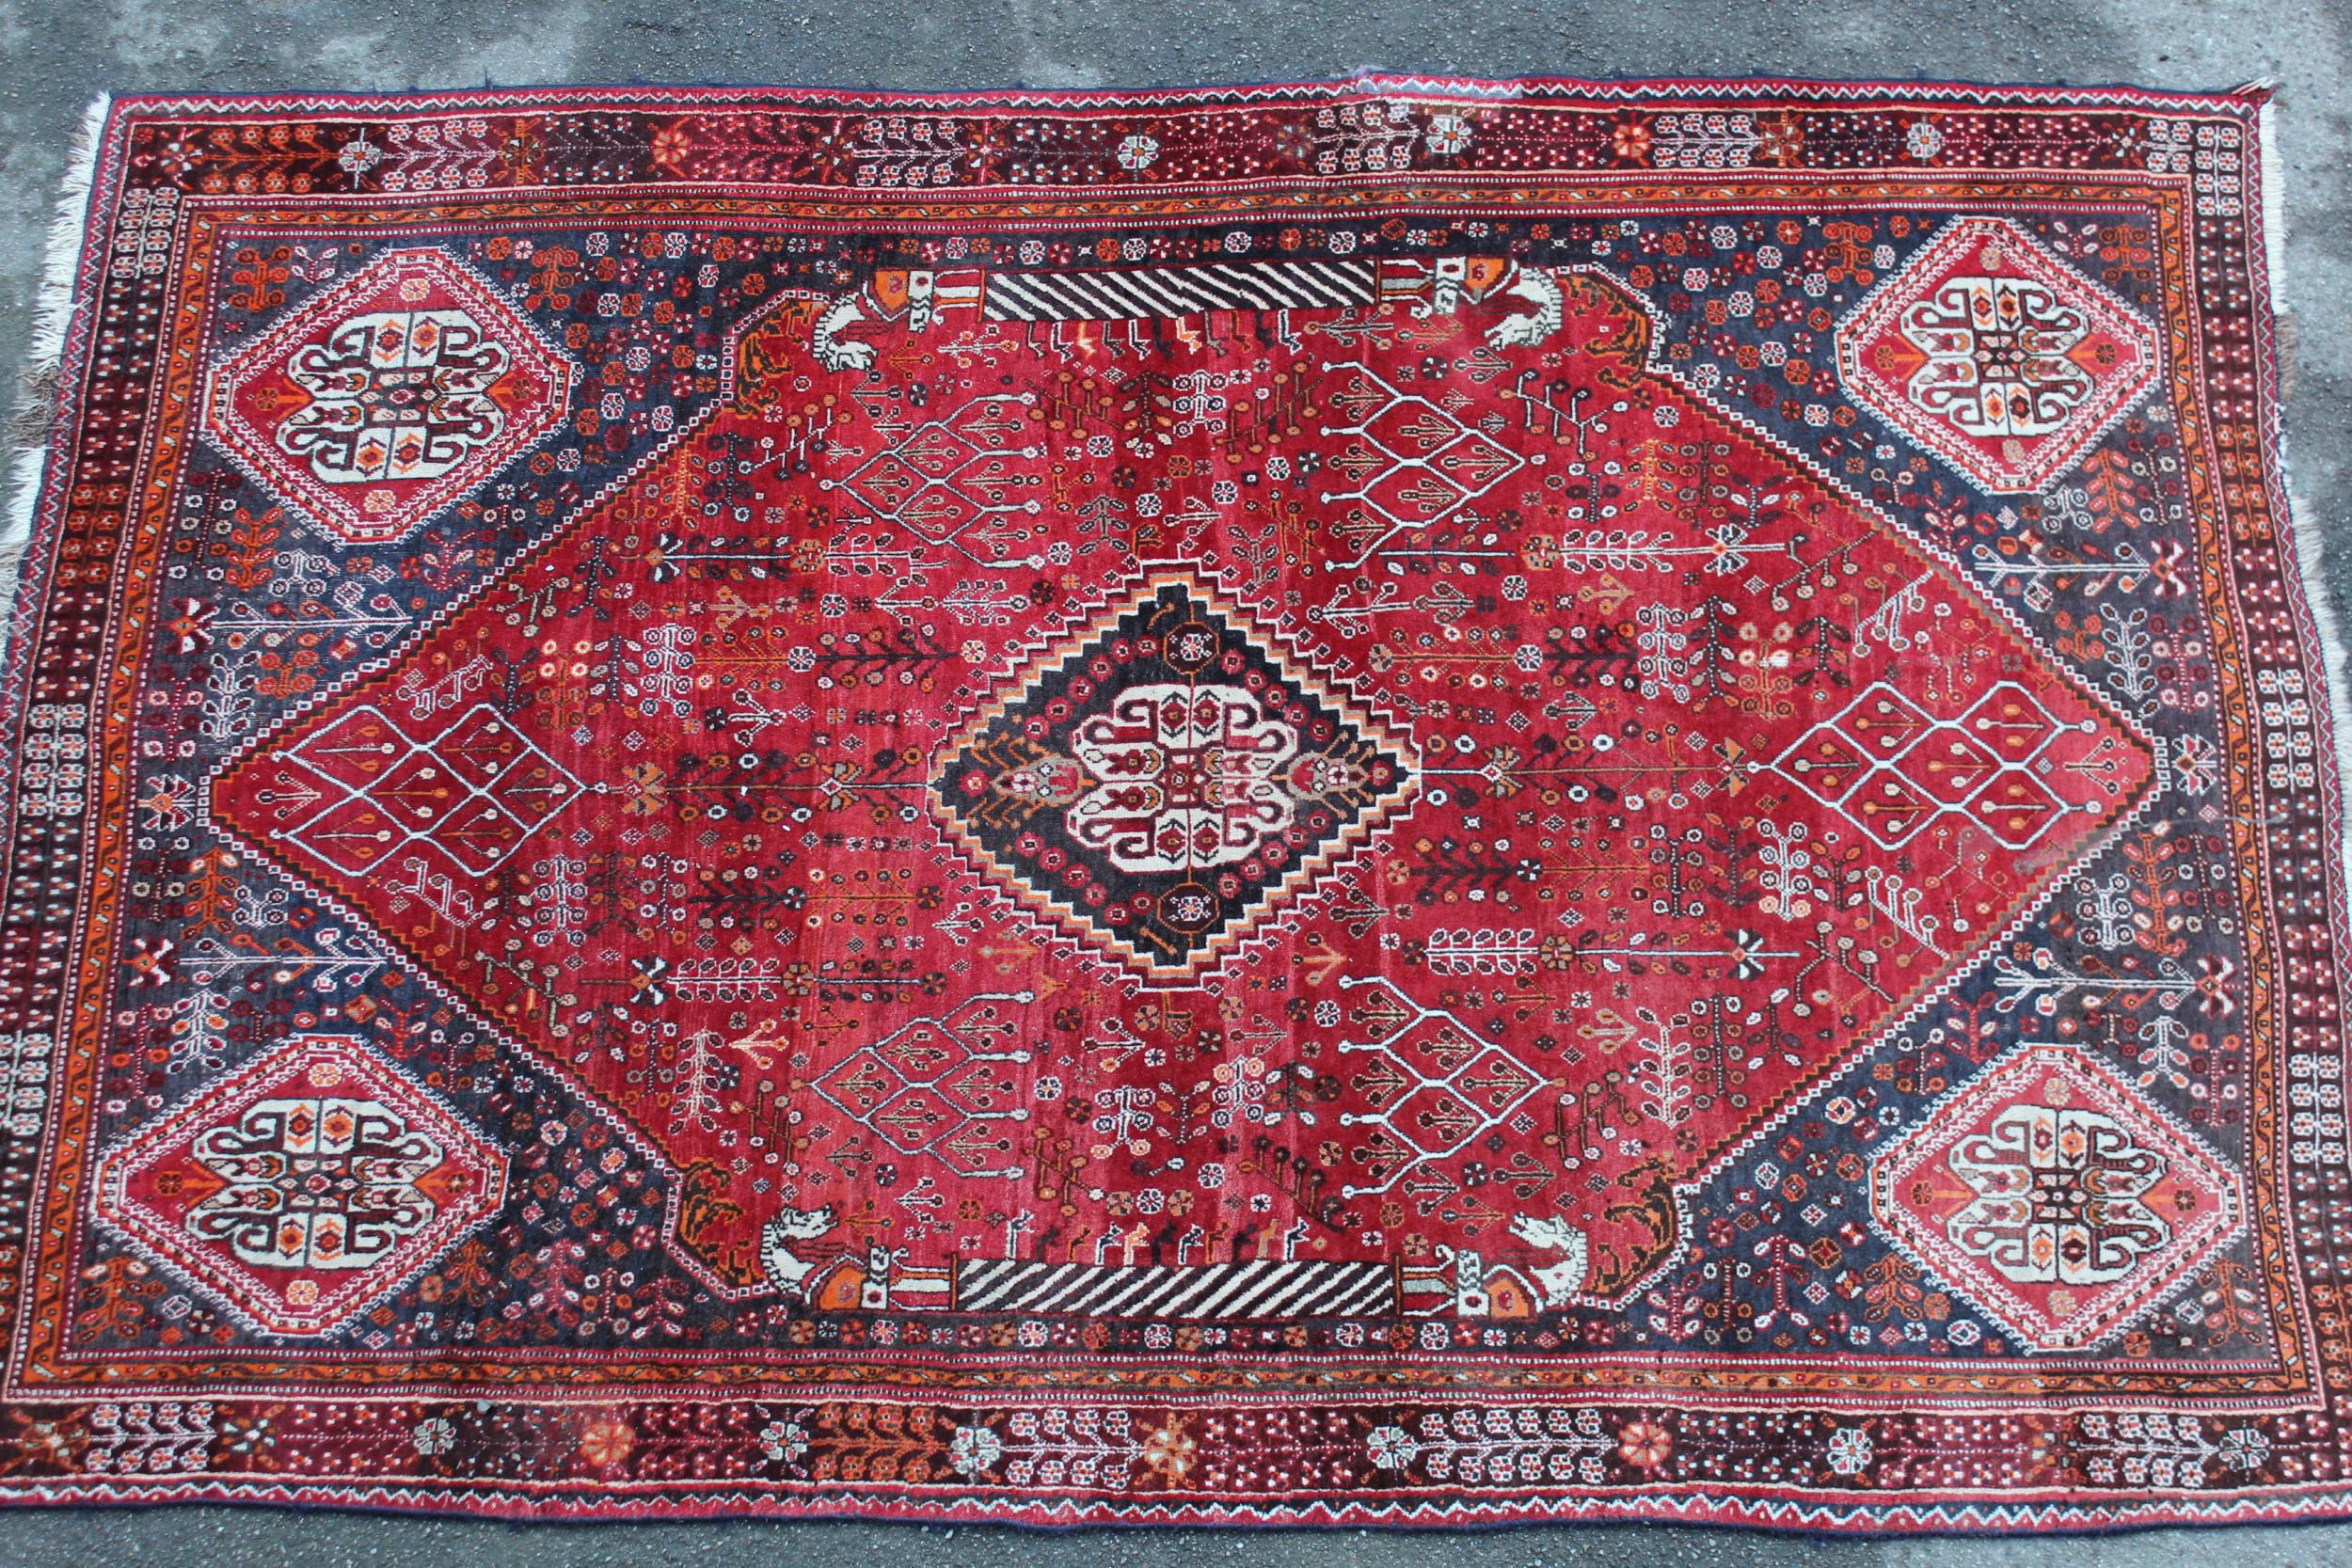 Qashqai rug with central medallion design on red and blue ground with borders, 96ins x 64ins Good